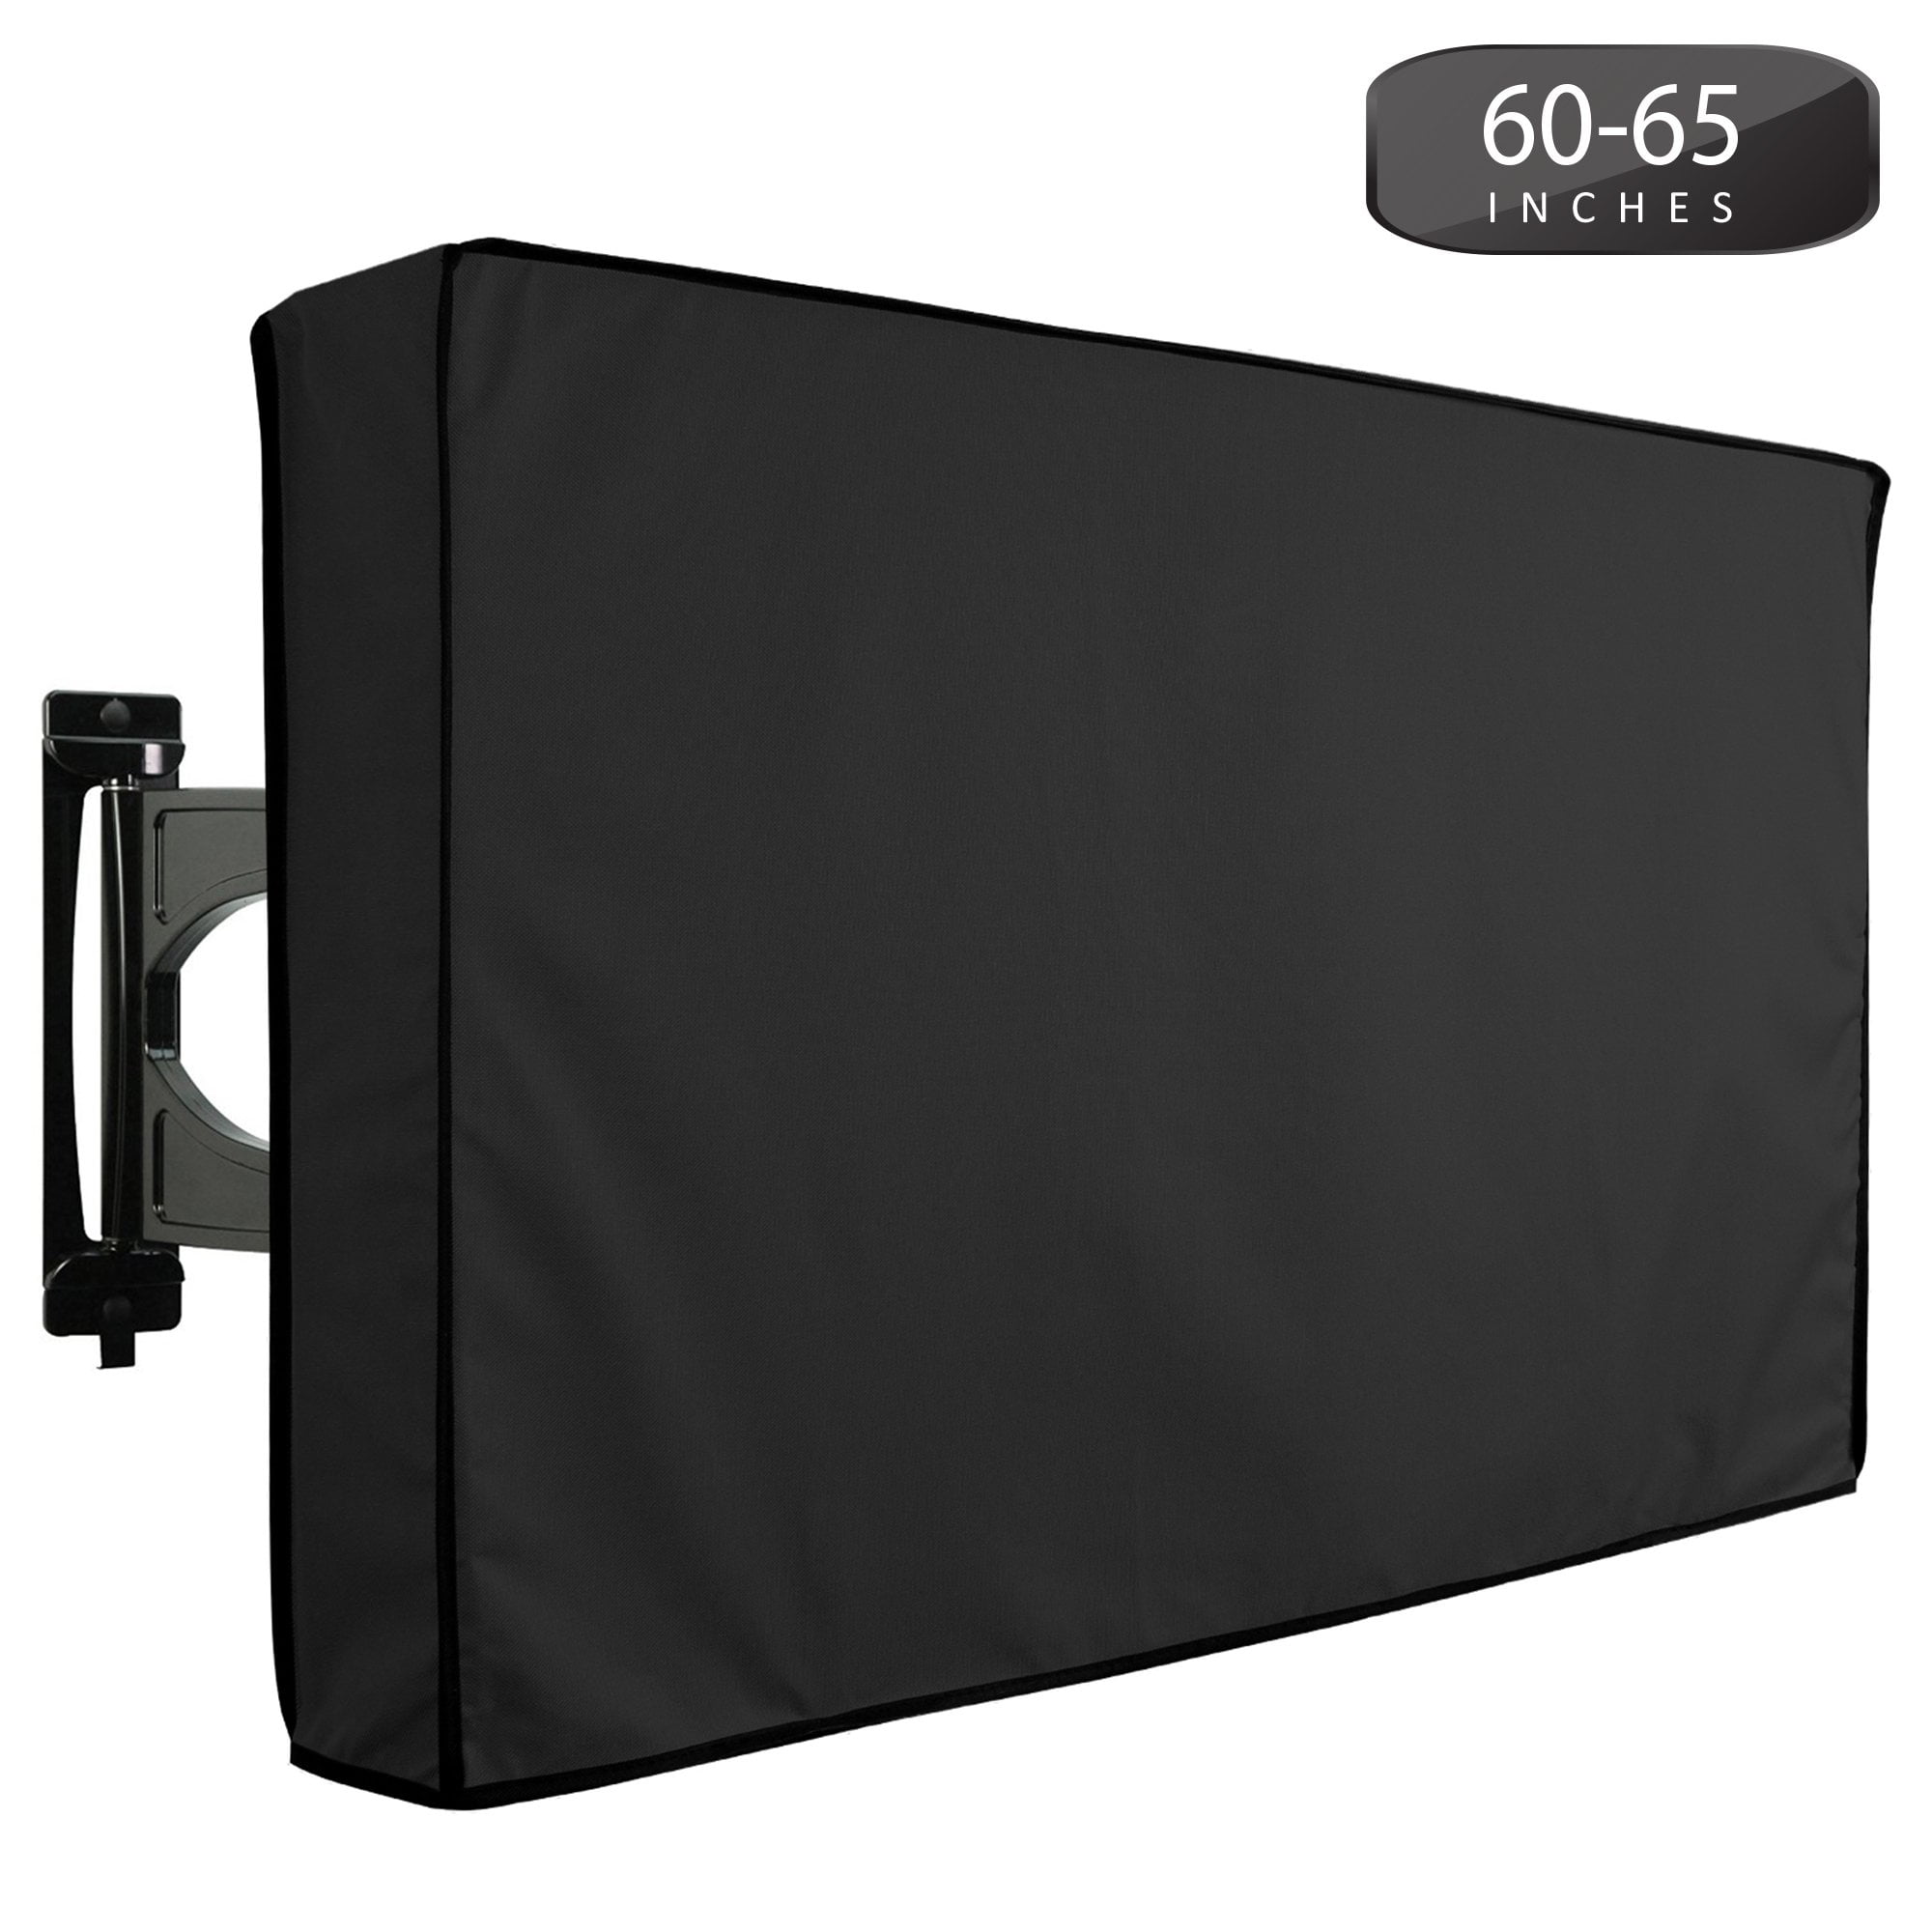 TV Screen Dustcover Television Protector for 32"-58" Indoor Living Room Home Use 